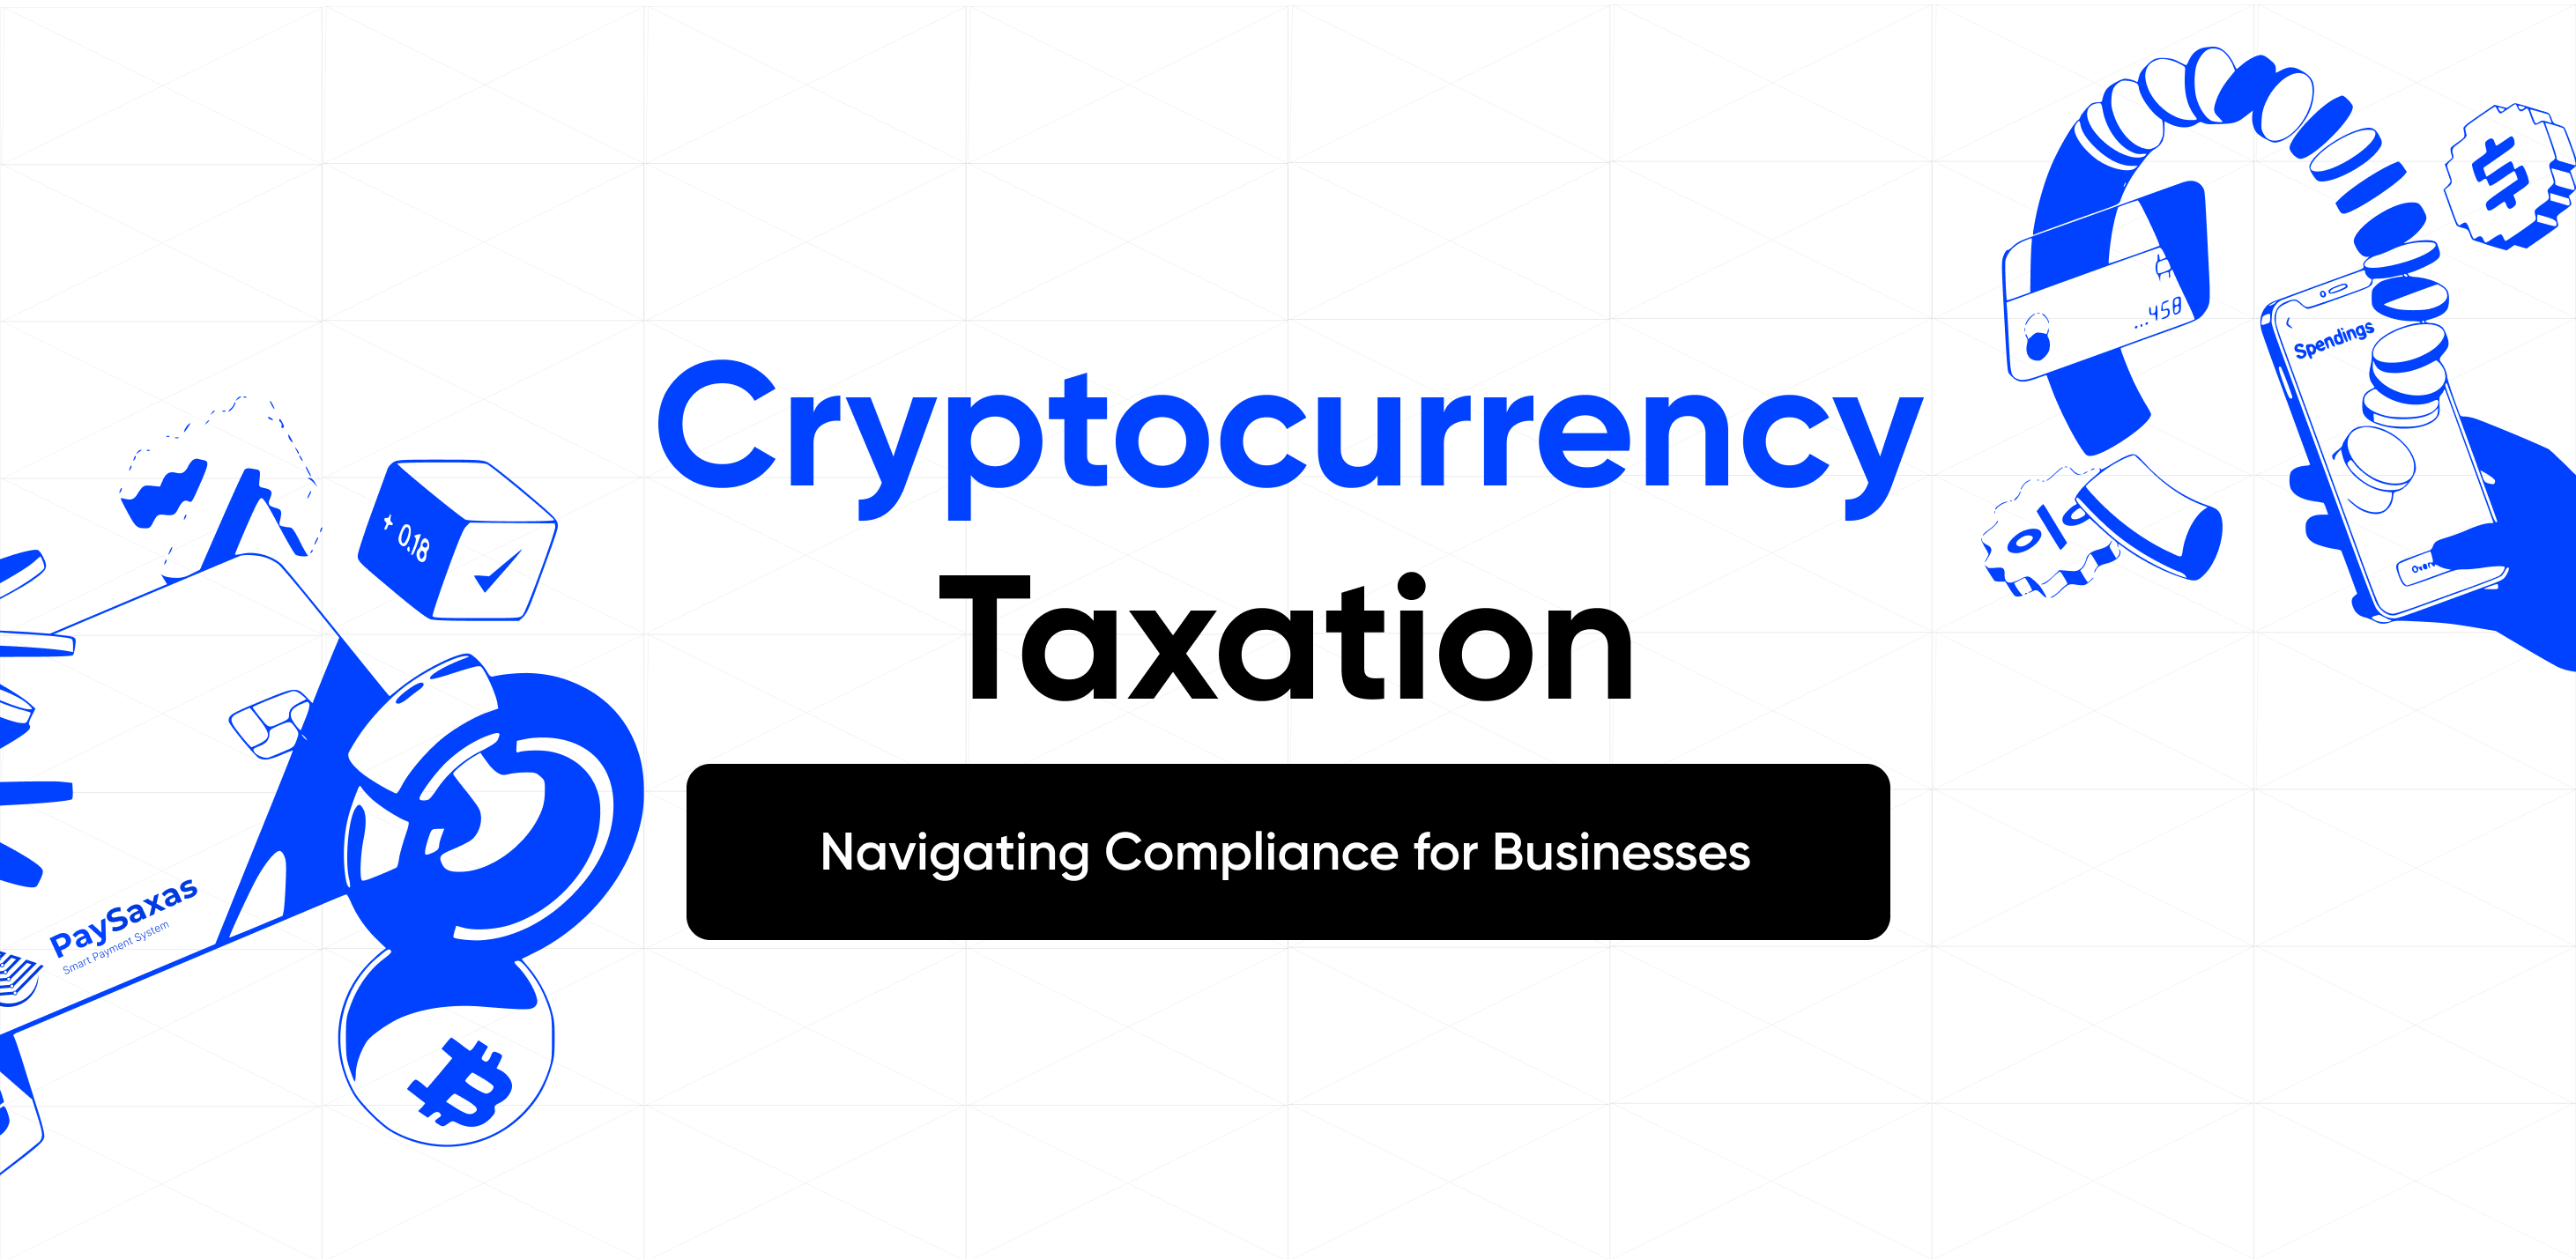 Cryptocurrency Taxation: Navigating Compliance for Businesses